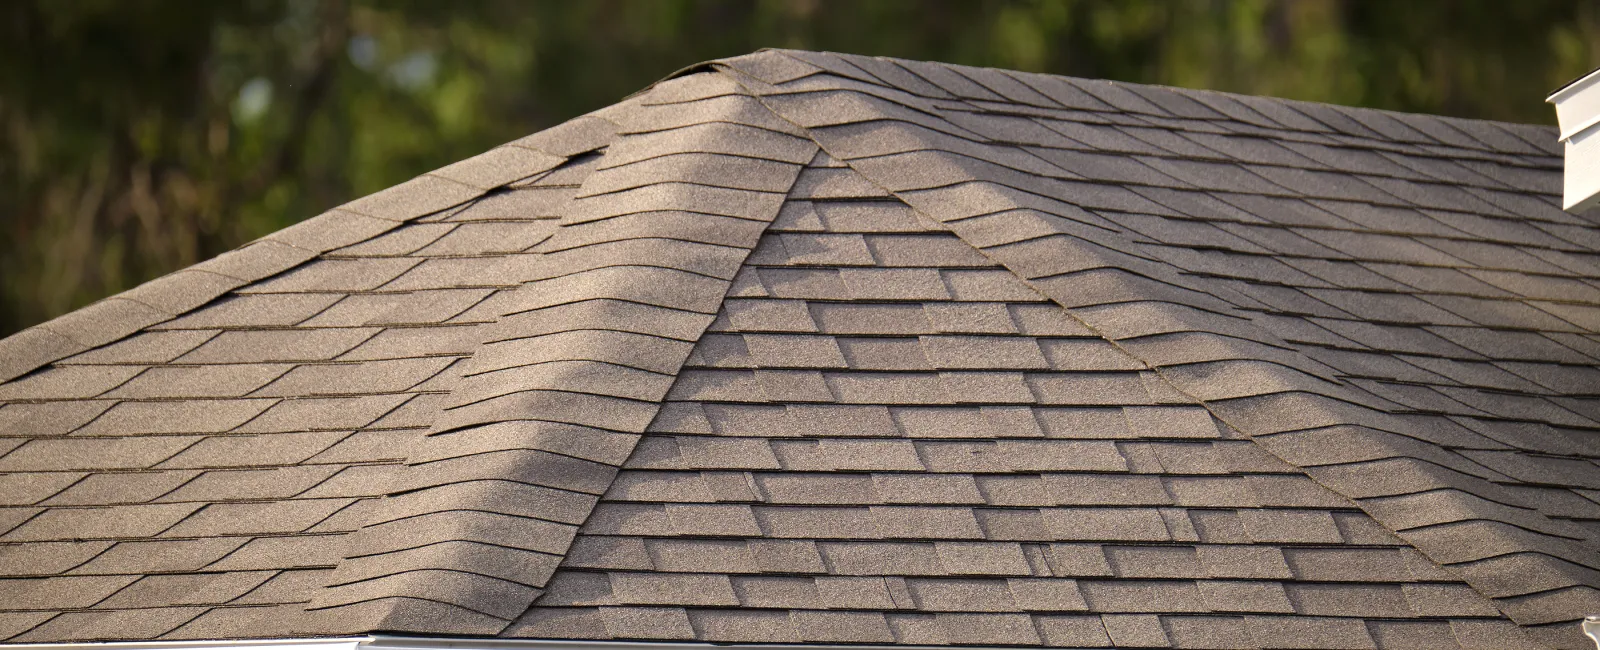 The Different Varieties of Roofing Materials